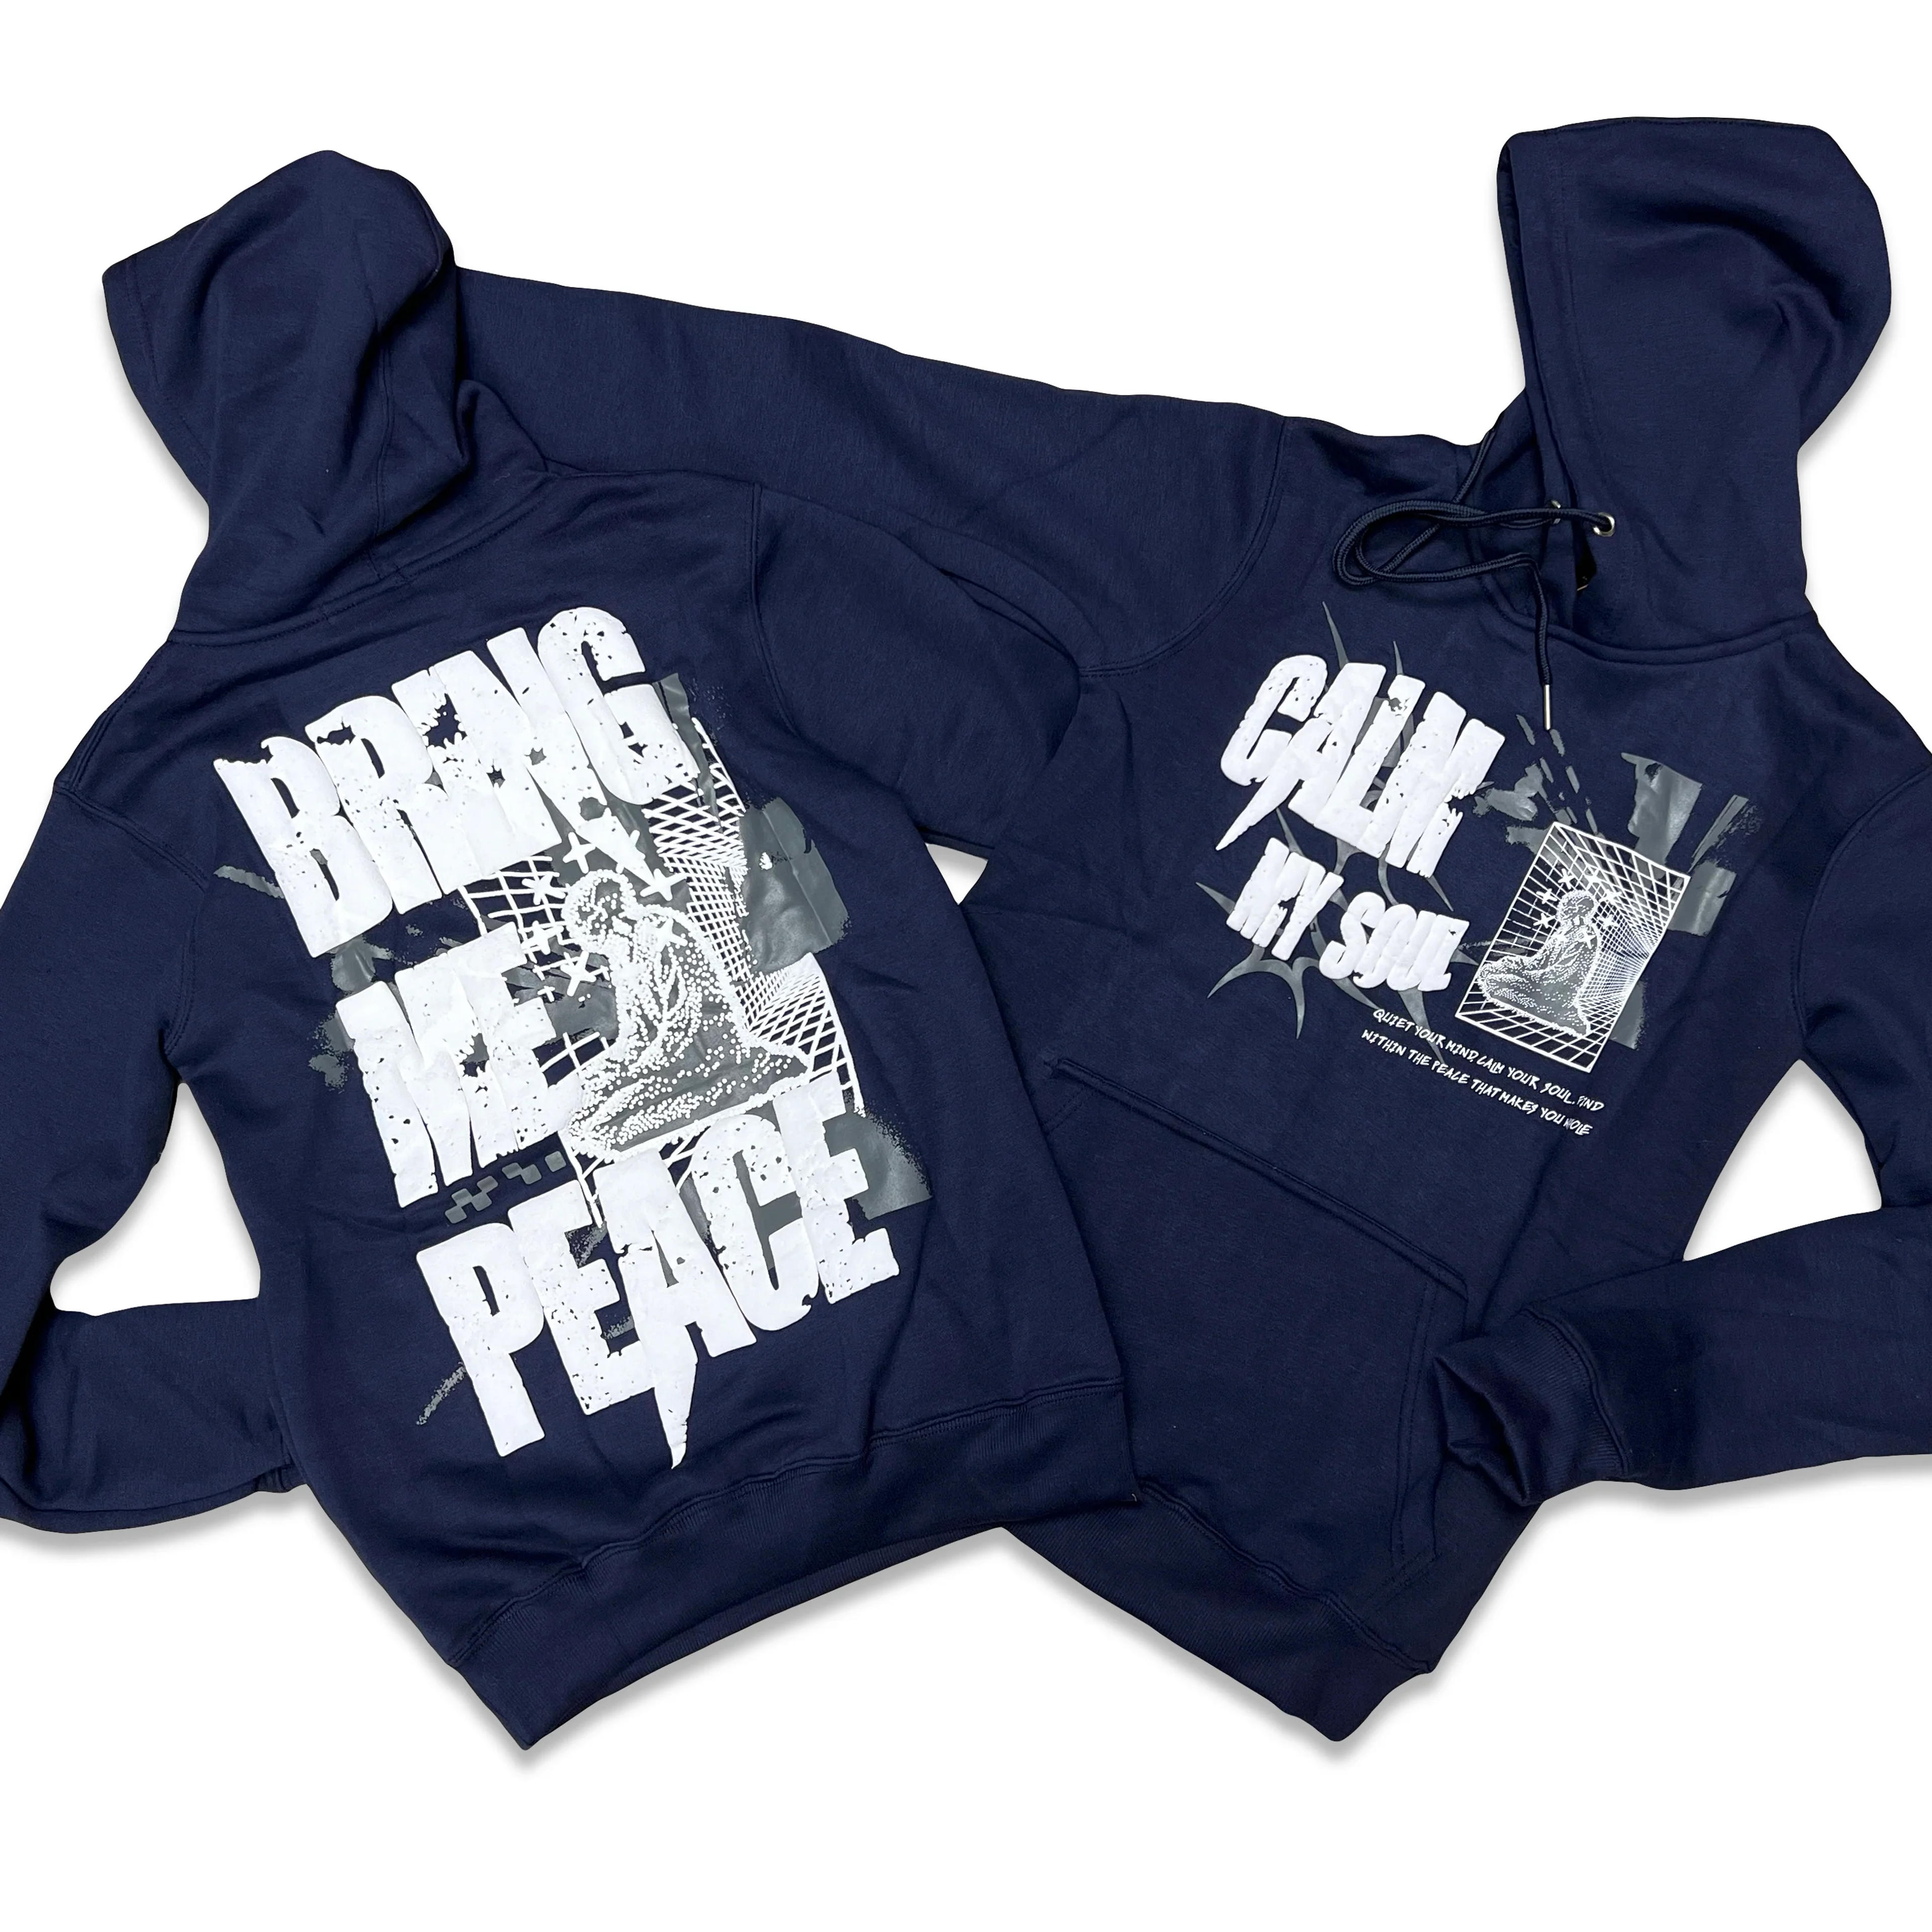 RETRO LABEL SOUL AND PEACE HOODIE (RETRO 5 MIDNIGHT NAVY) - L